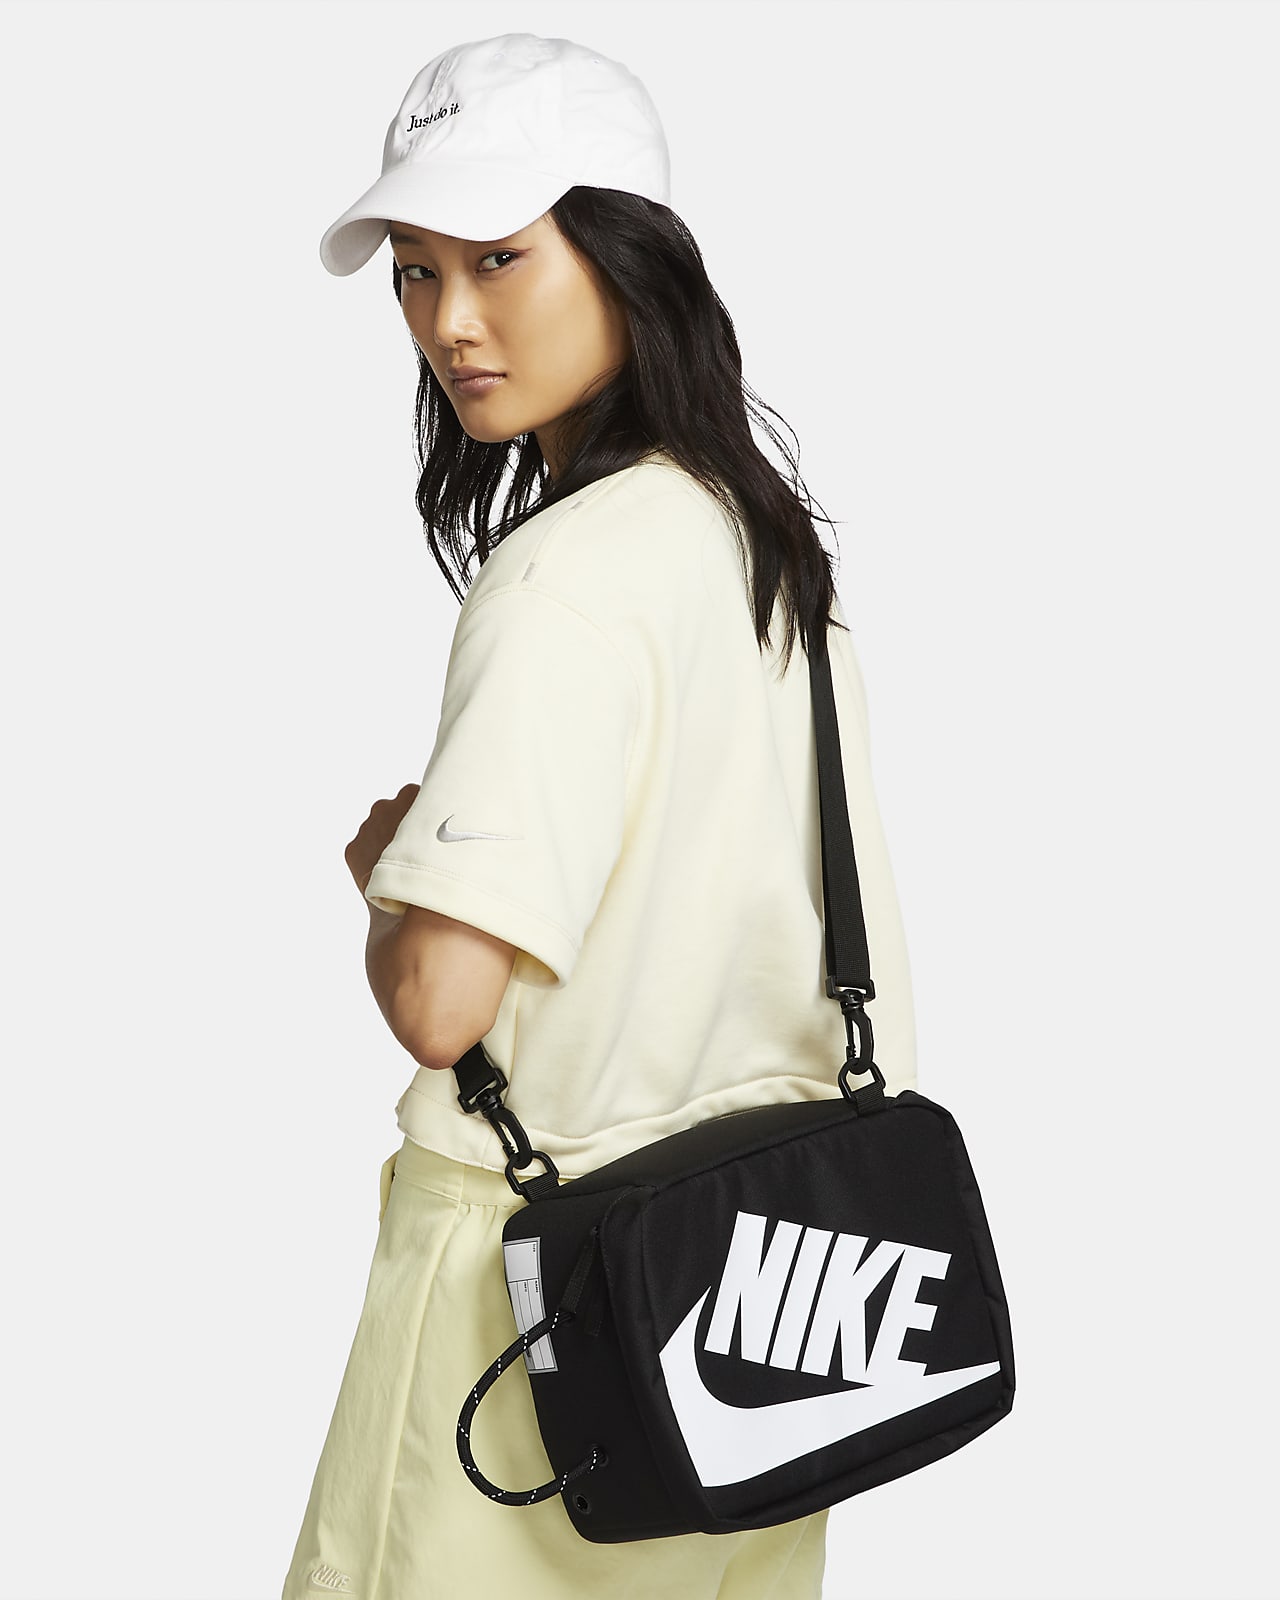 Sac à chaussures Nike (petite taille, 8 L)